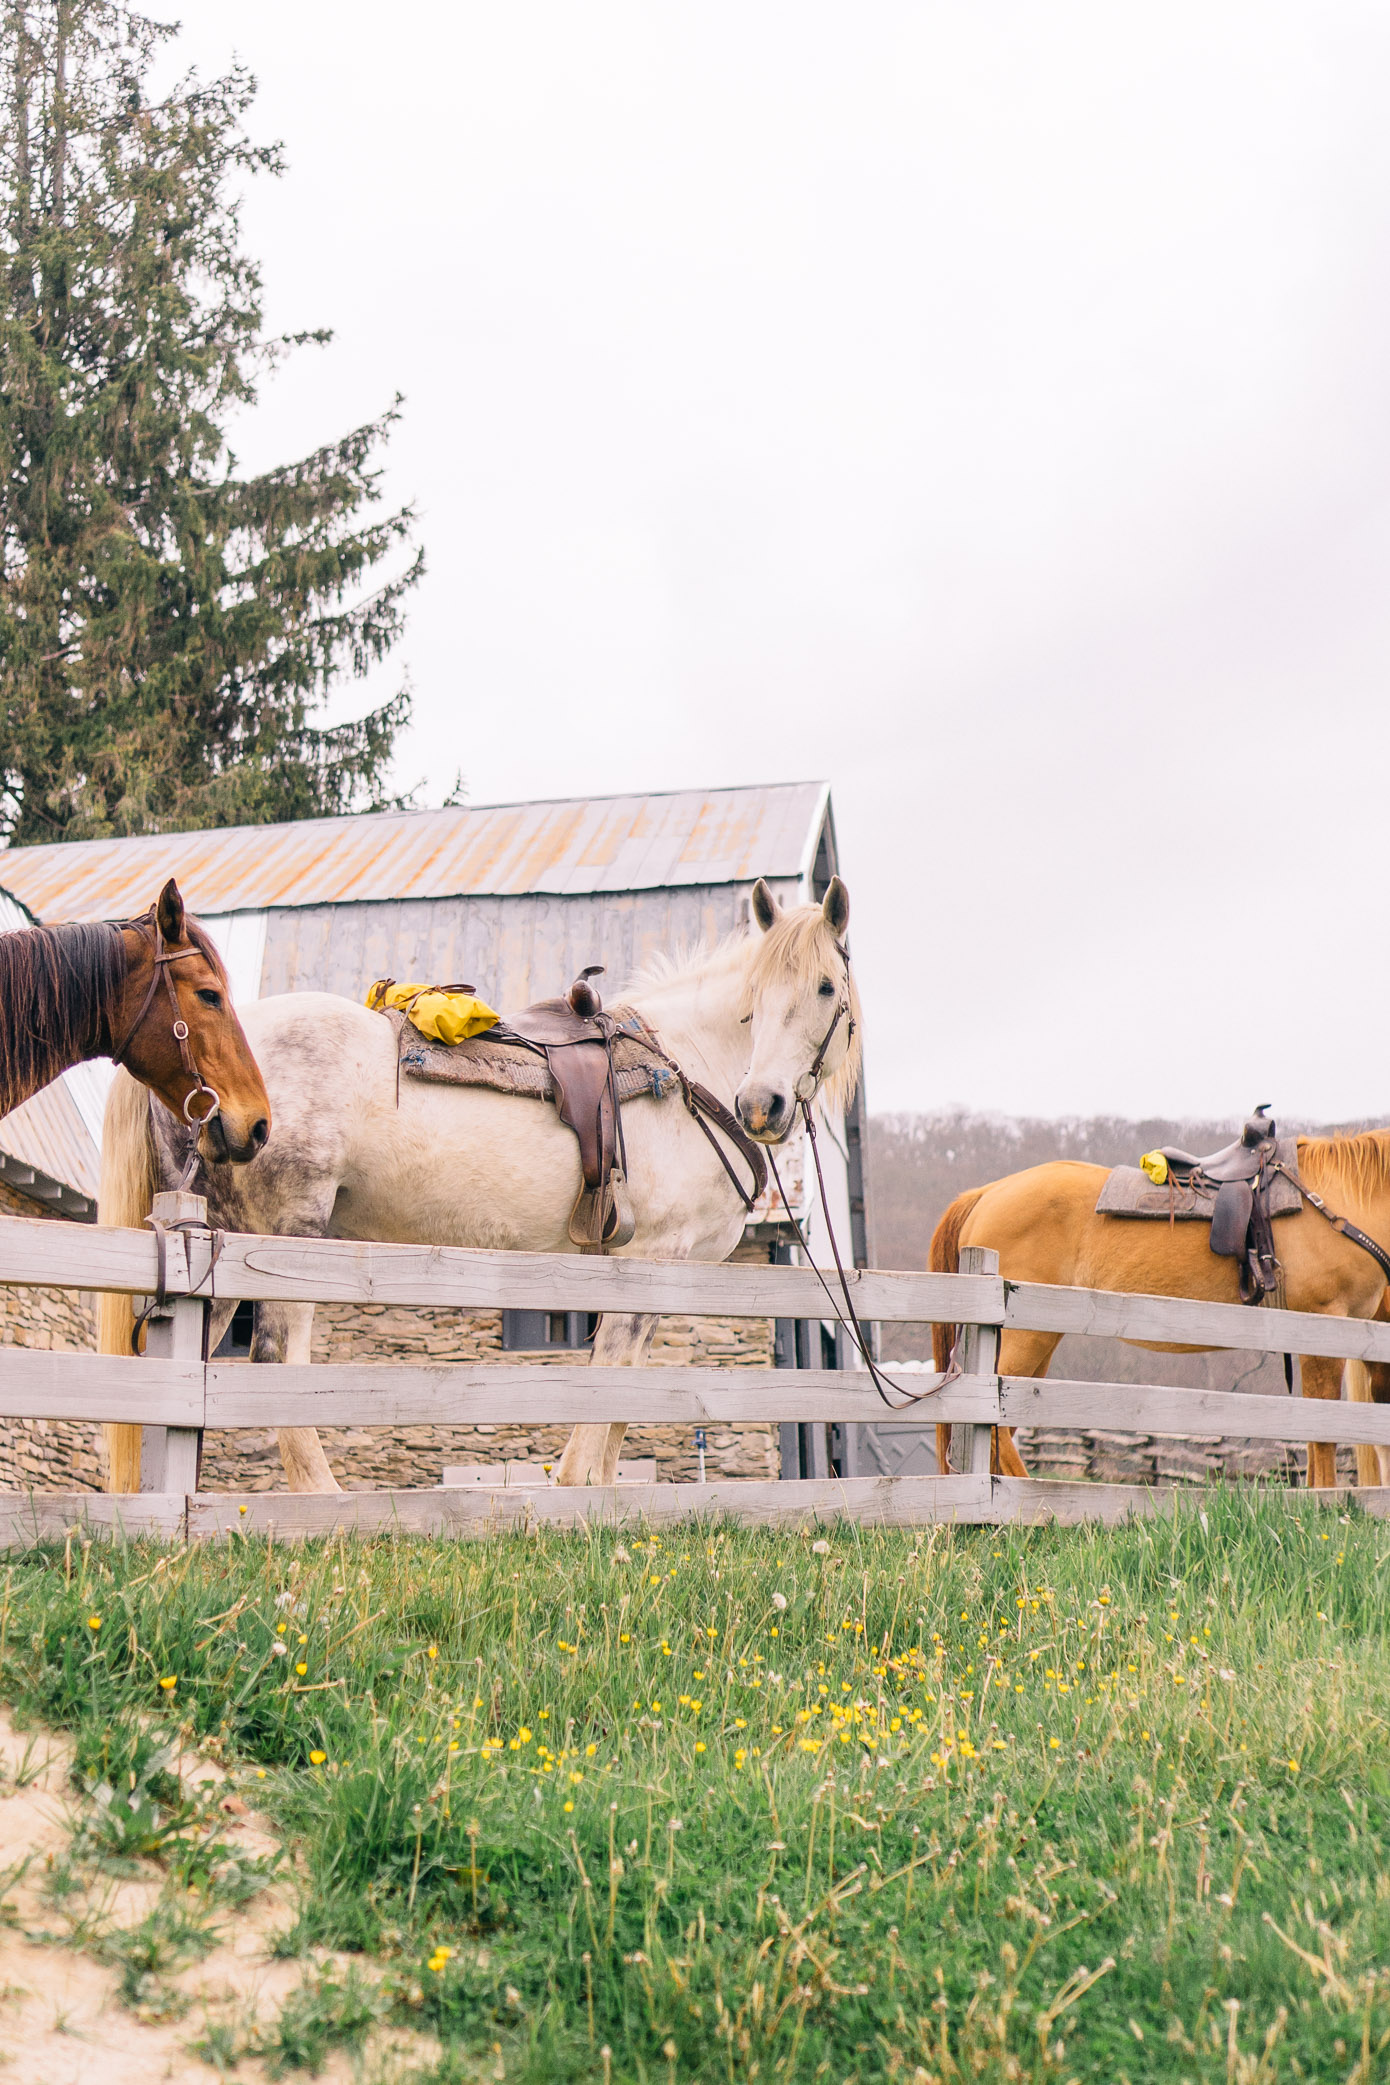 Cataloochee Ranch Review | Where to Go Horseback Riding in NC Mountains | Louella Reese Life & Style Blog